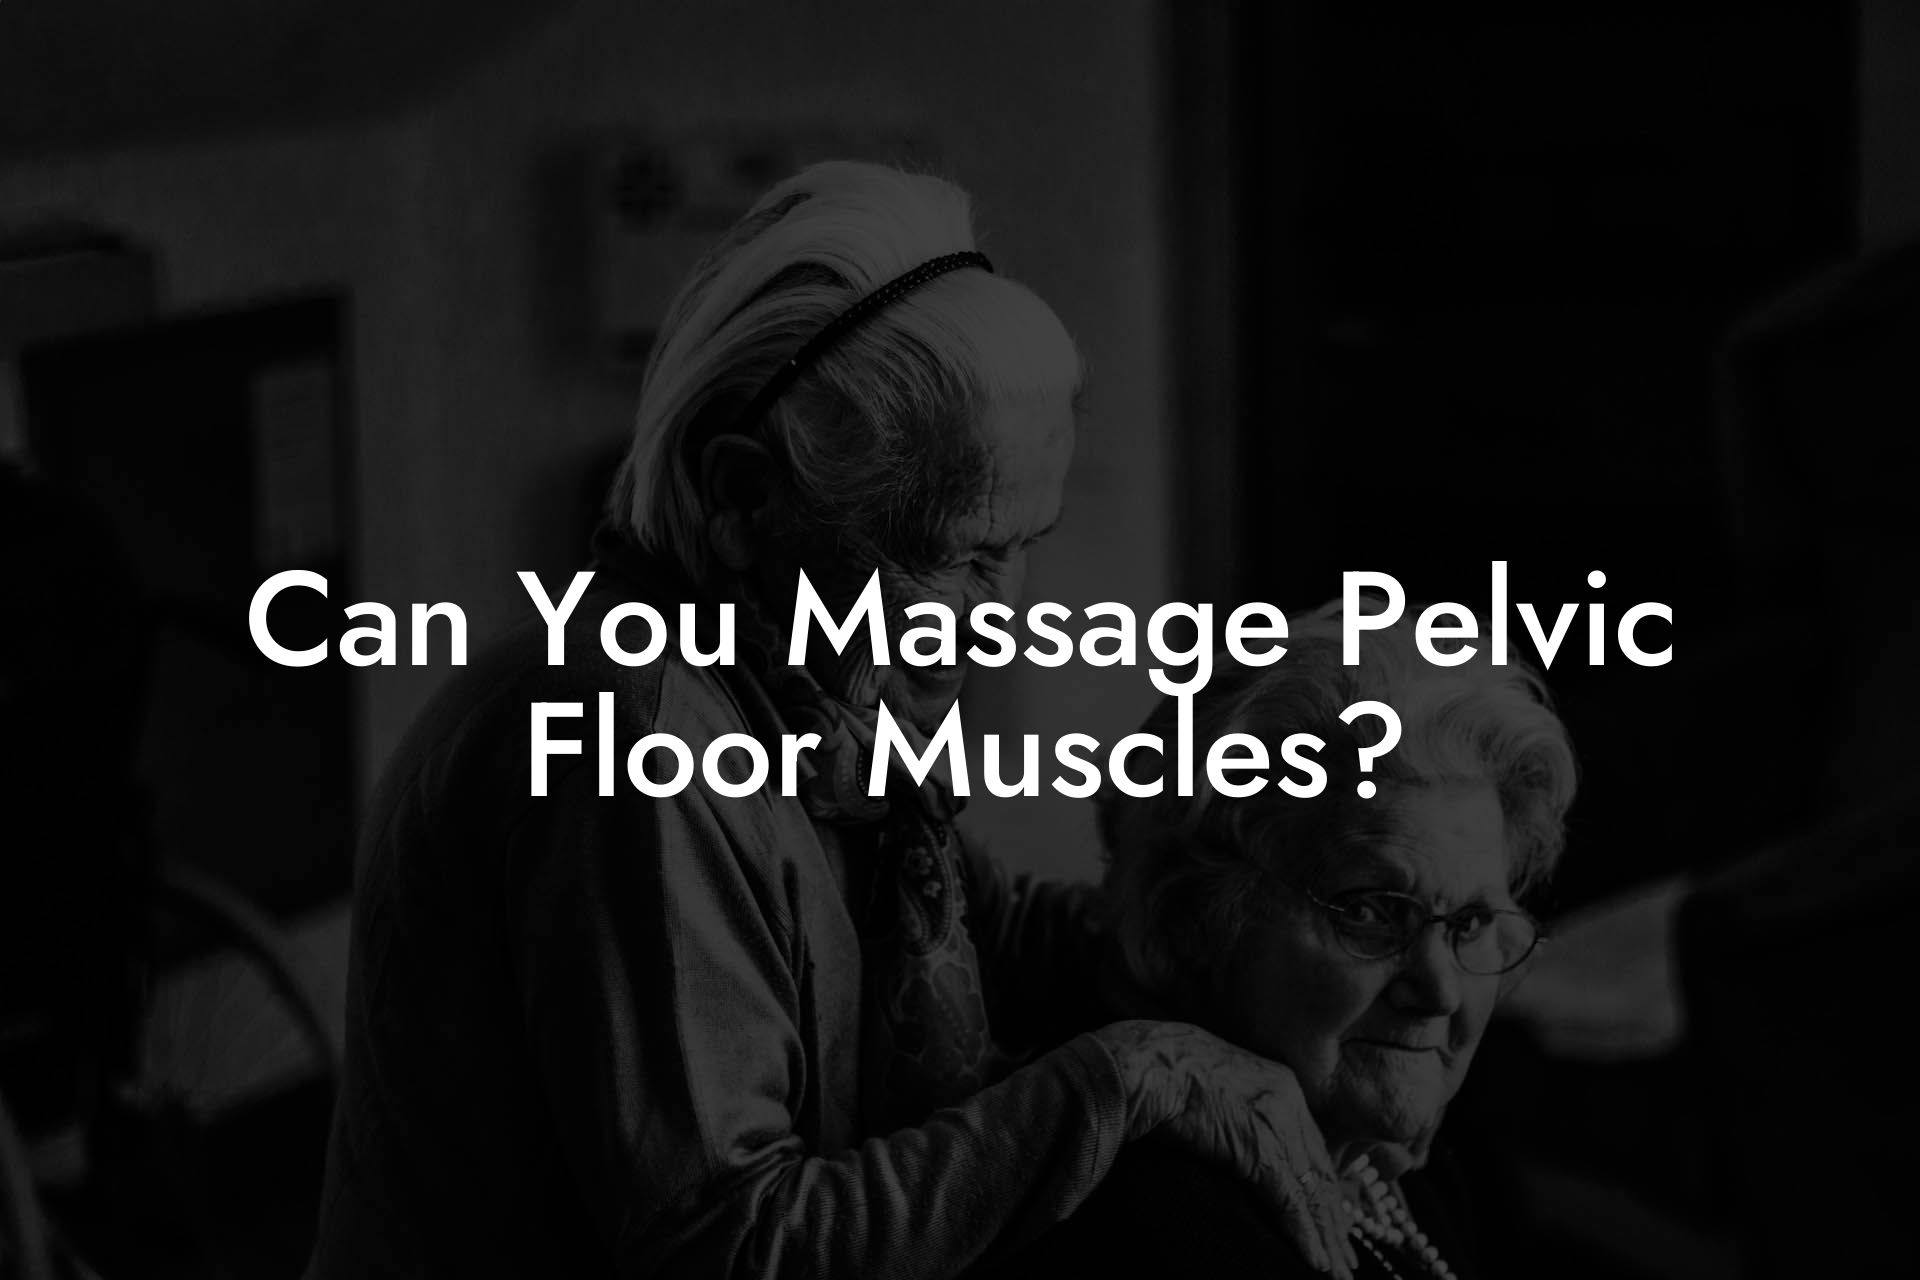 Can You Massage Pelvic Floor Muscles?